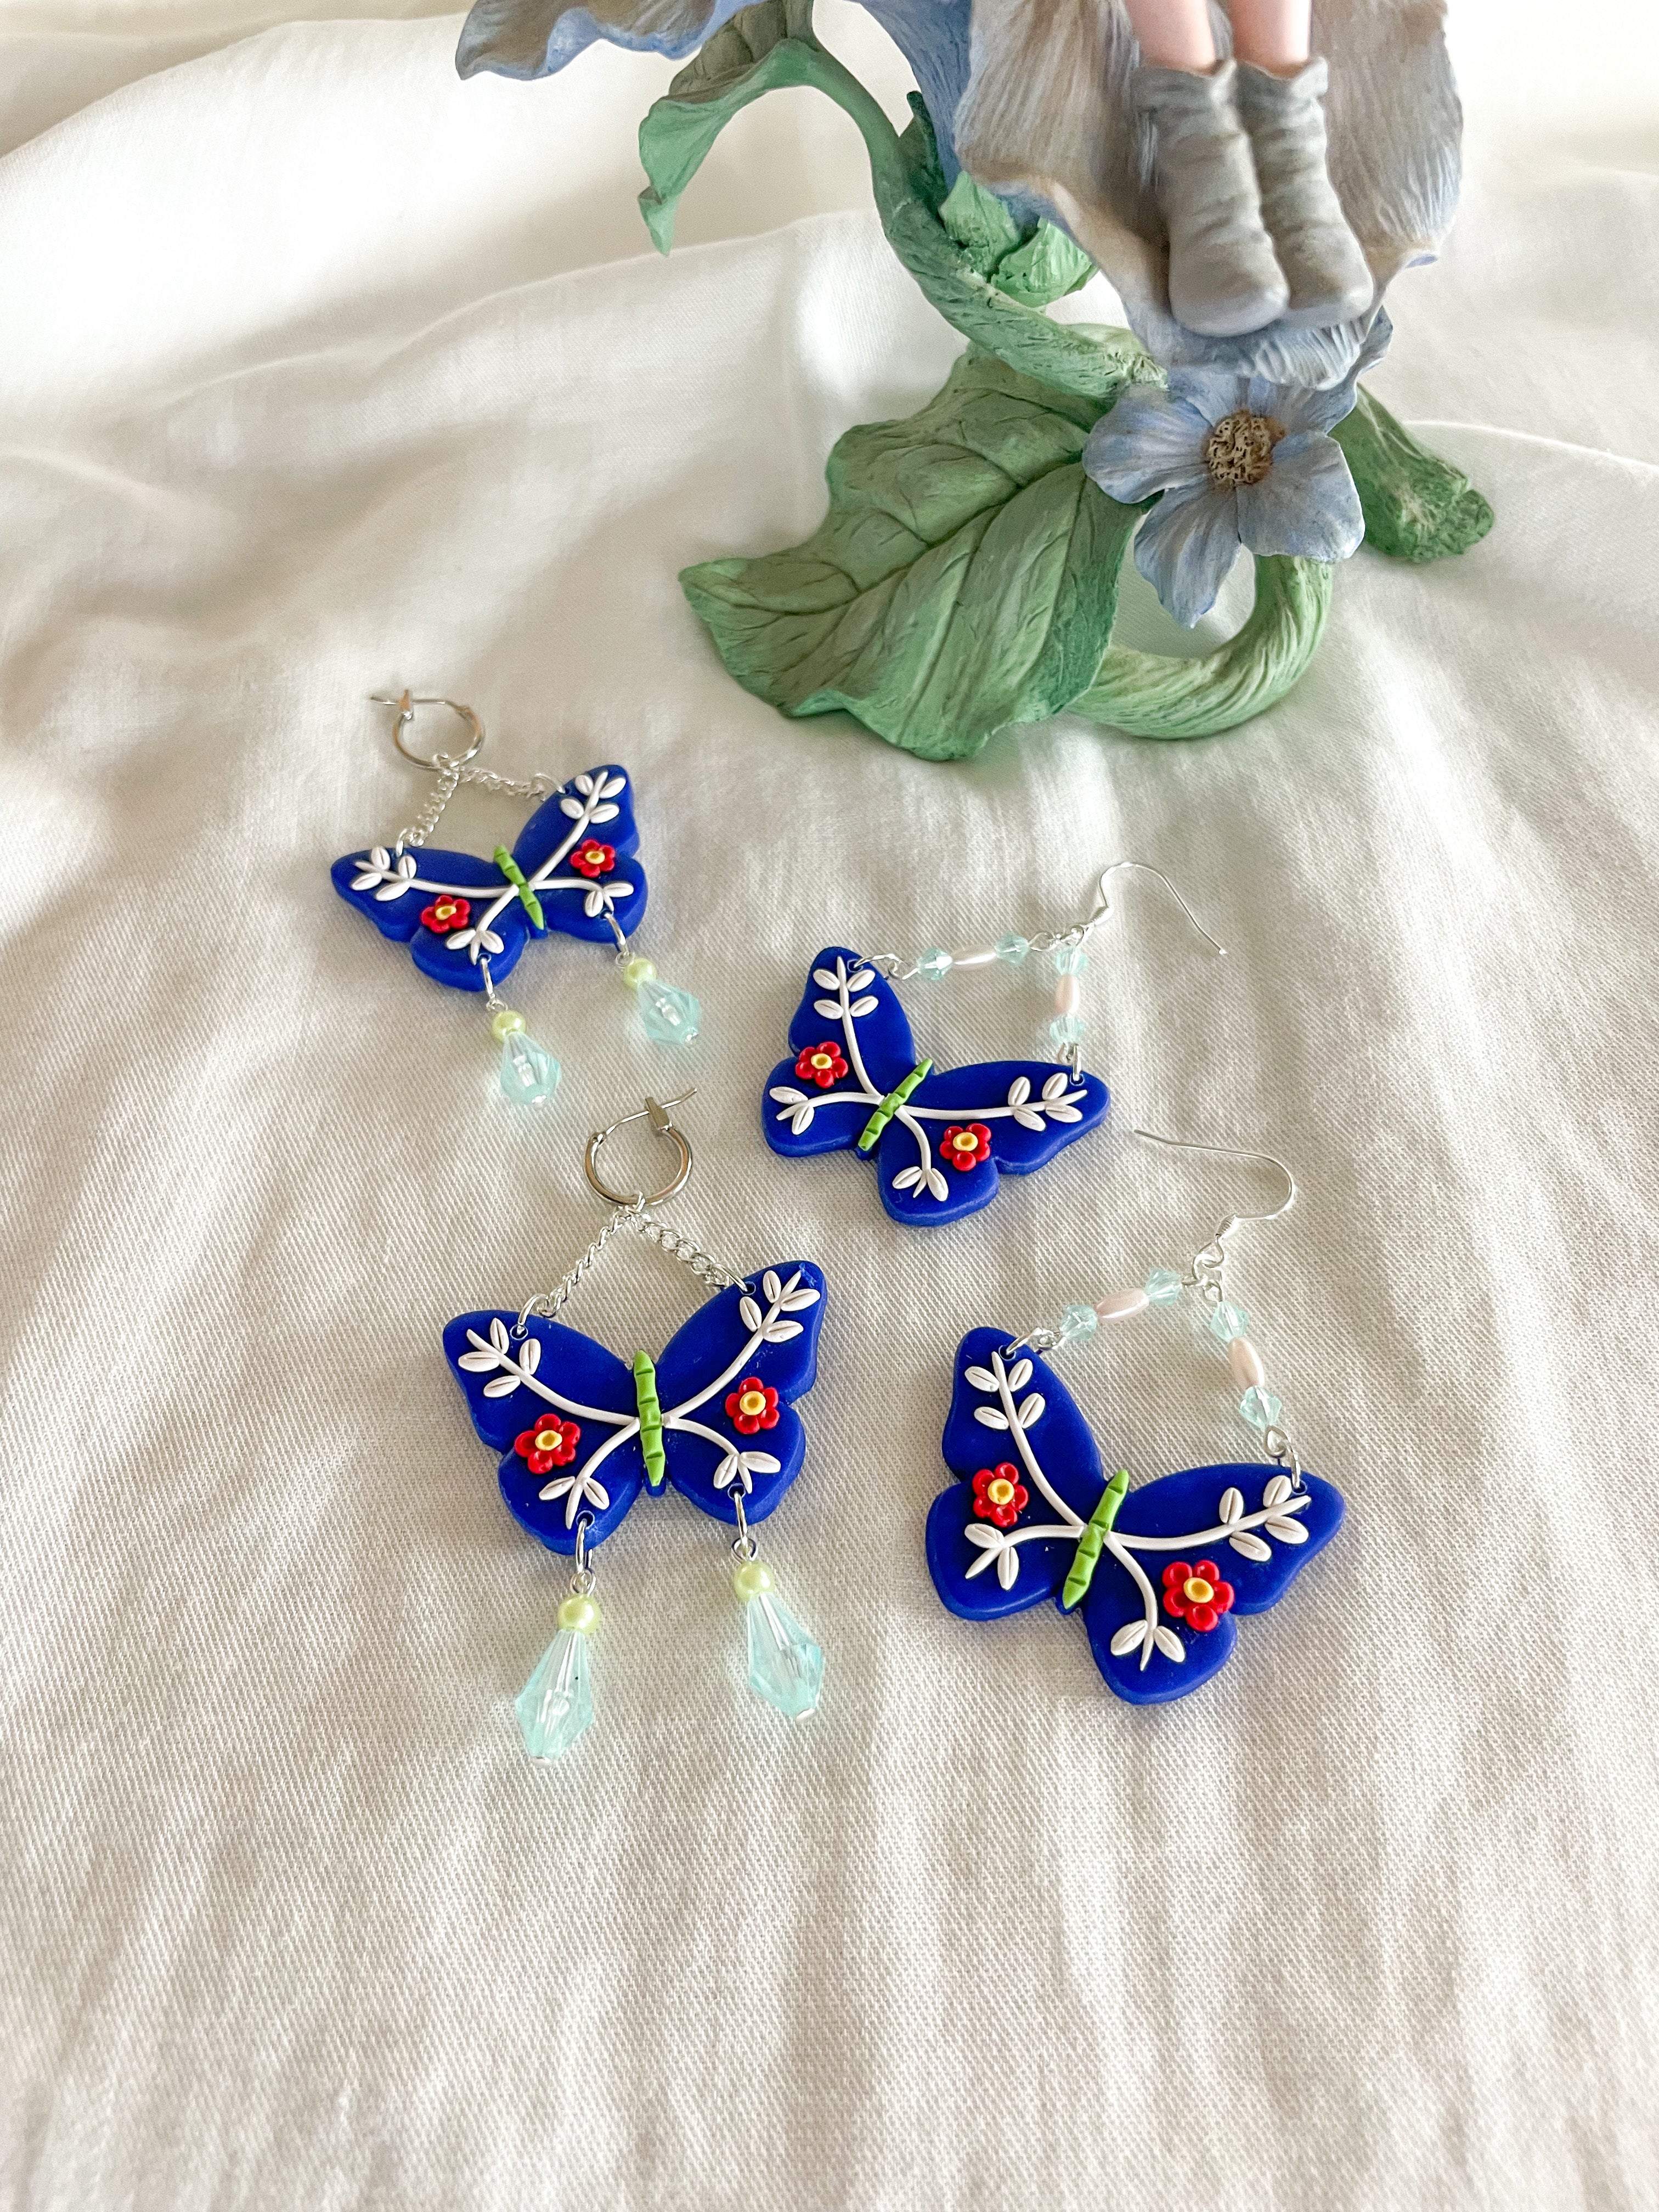 Butterfly Babies with Dangled Beads